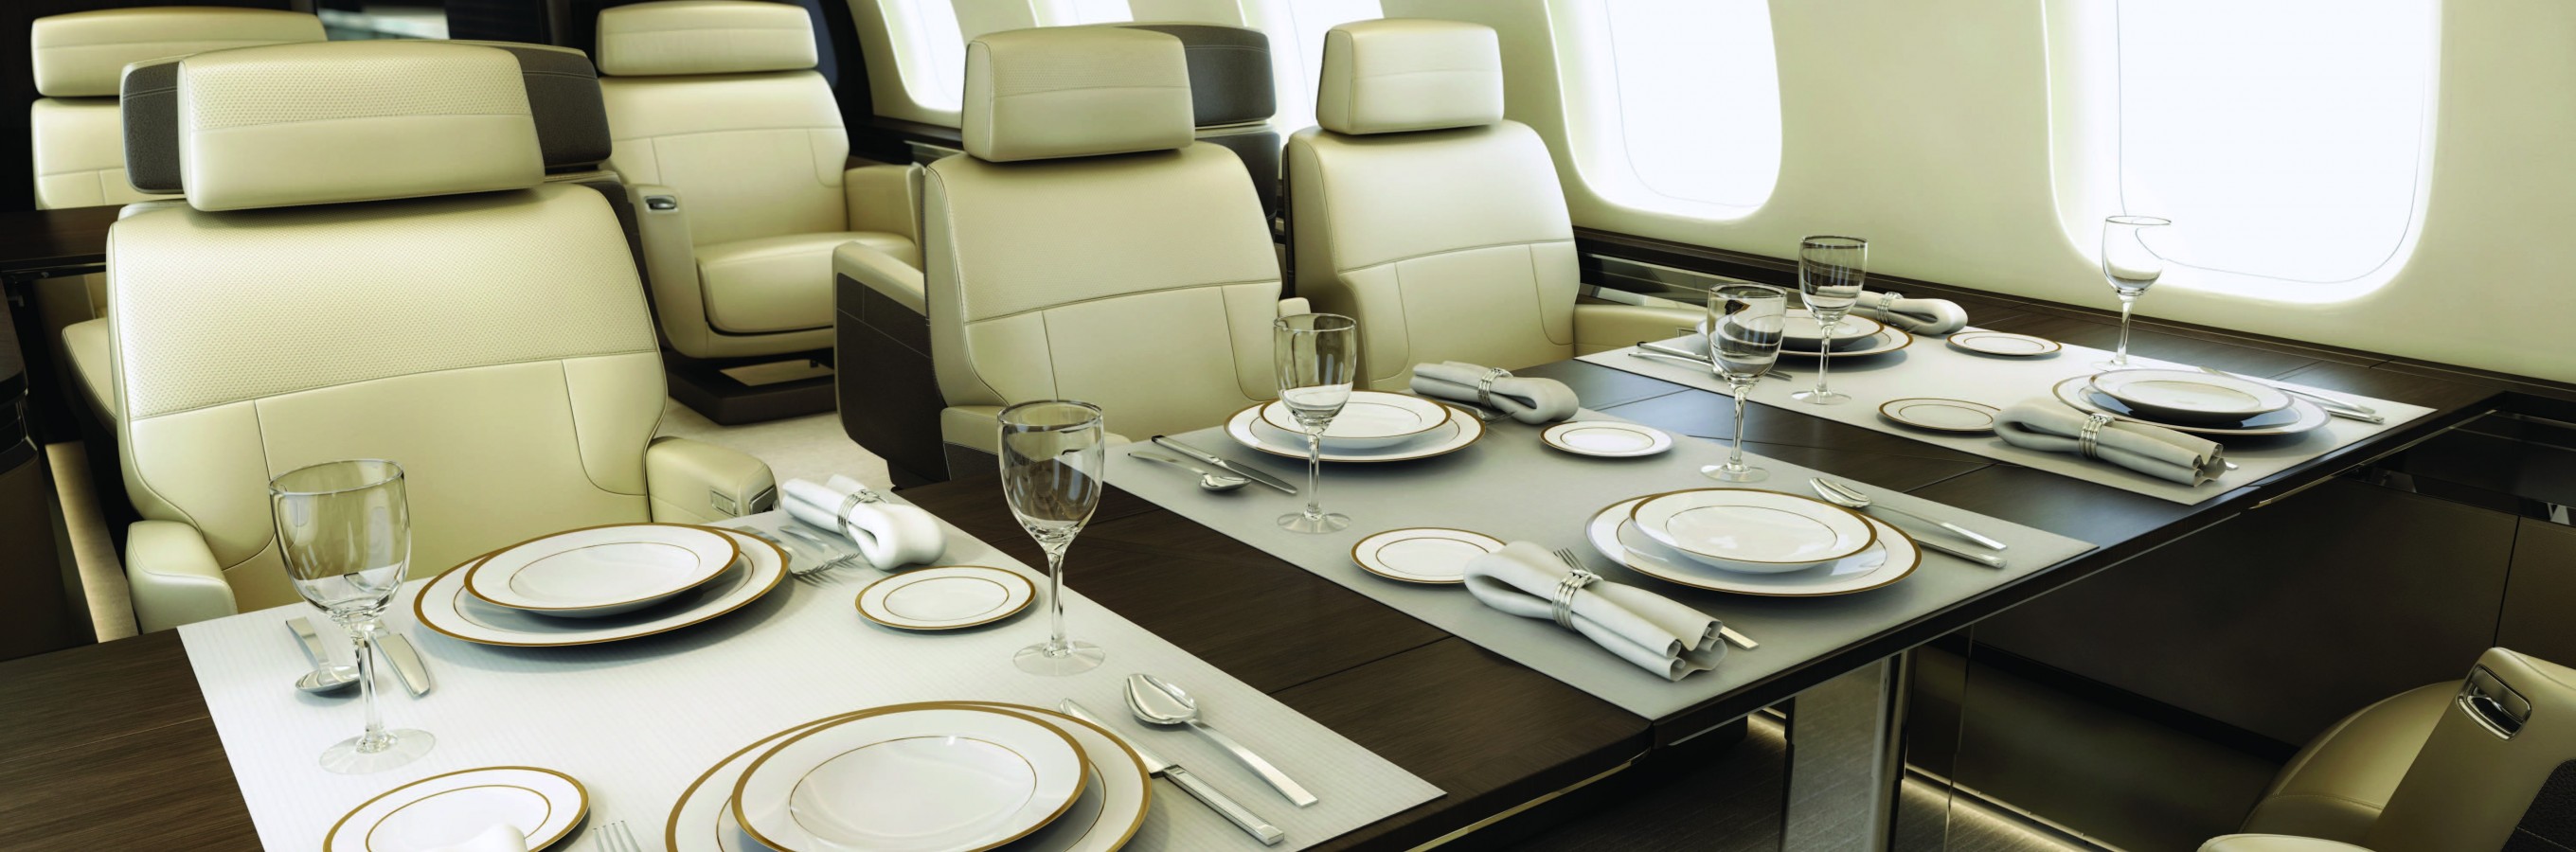 global-7500-private-jet-dining-table